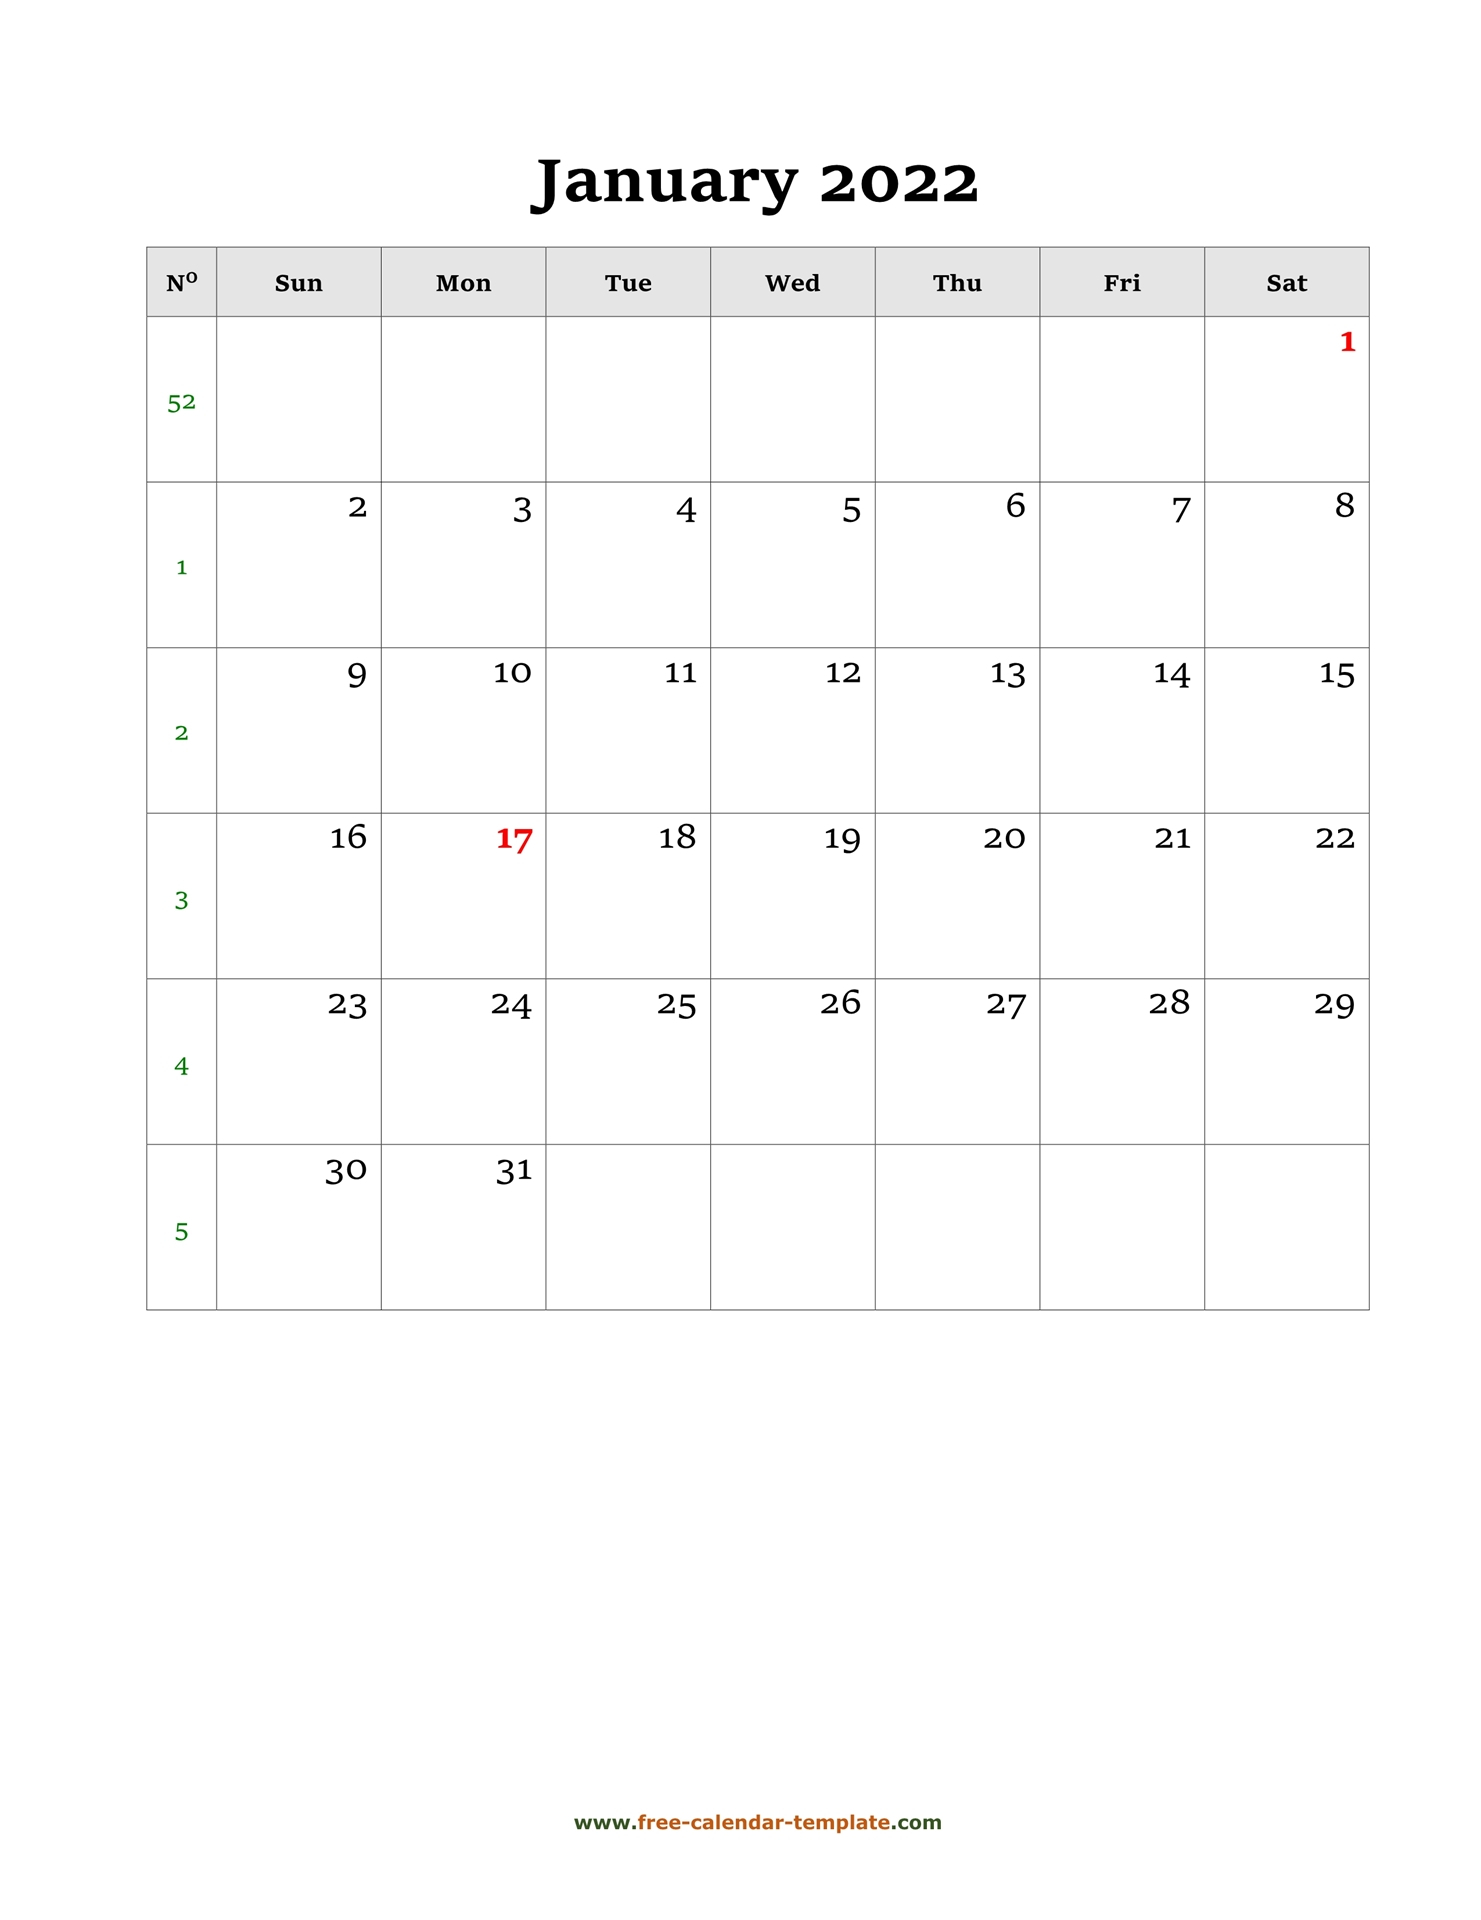 Monthly Calendar 2022 Simple Design With Large Box On Each